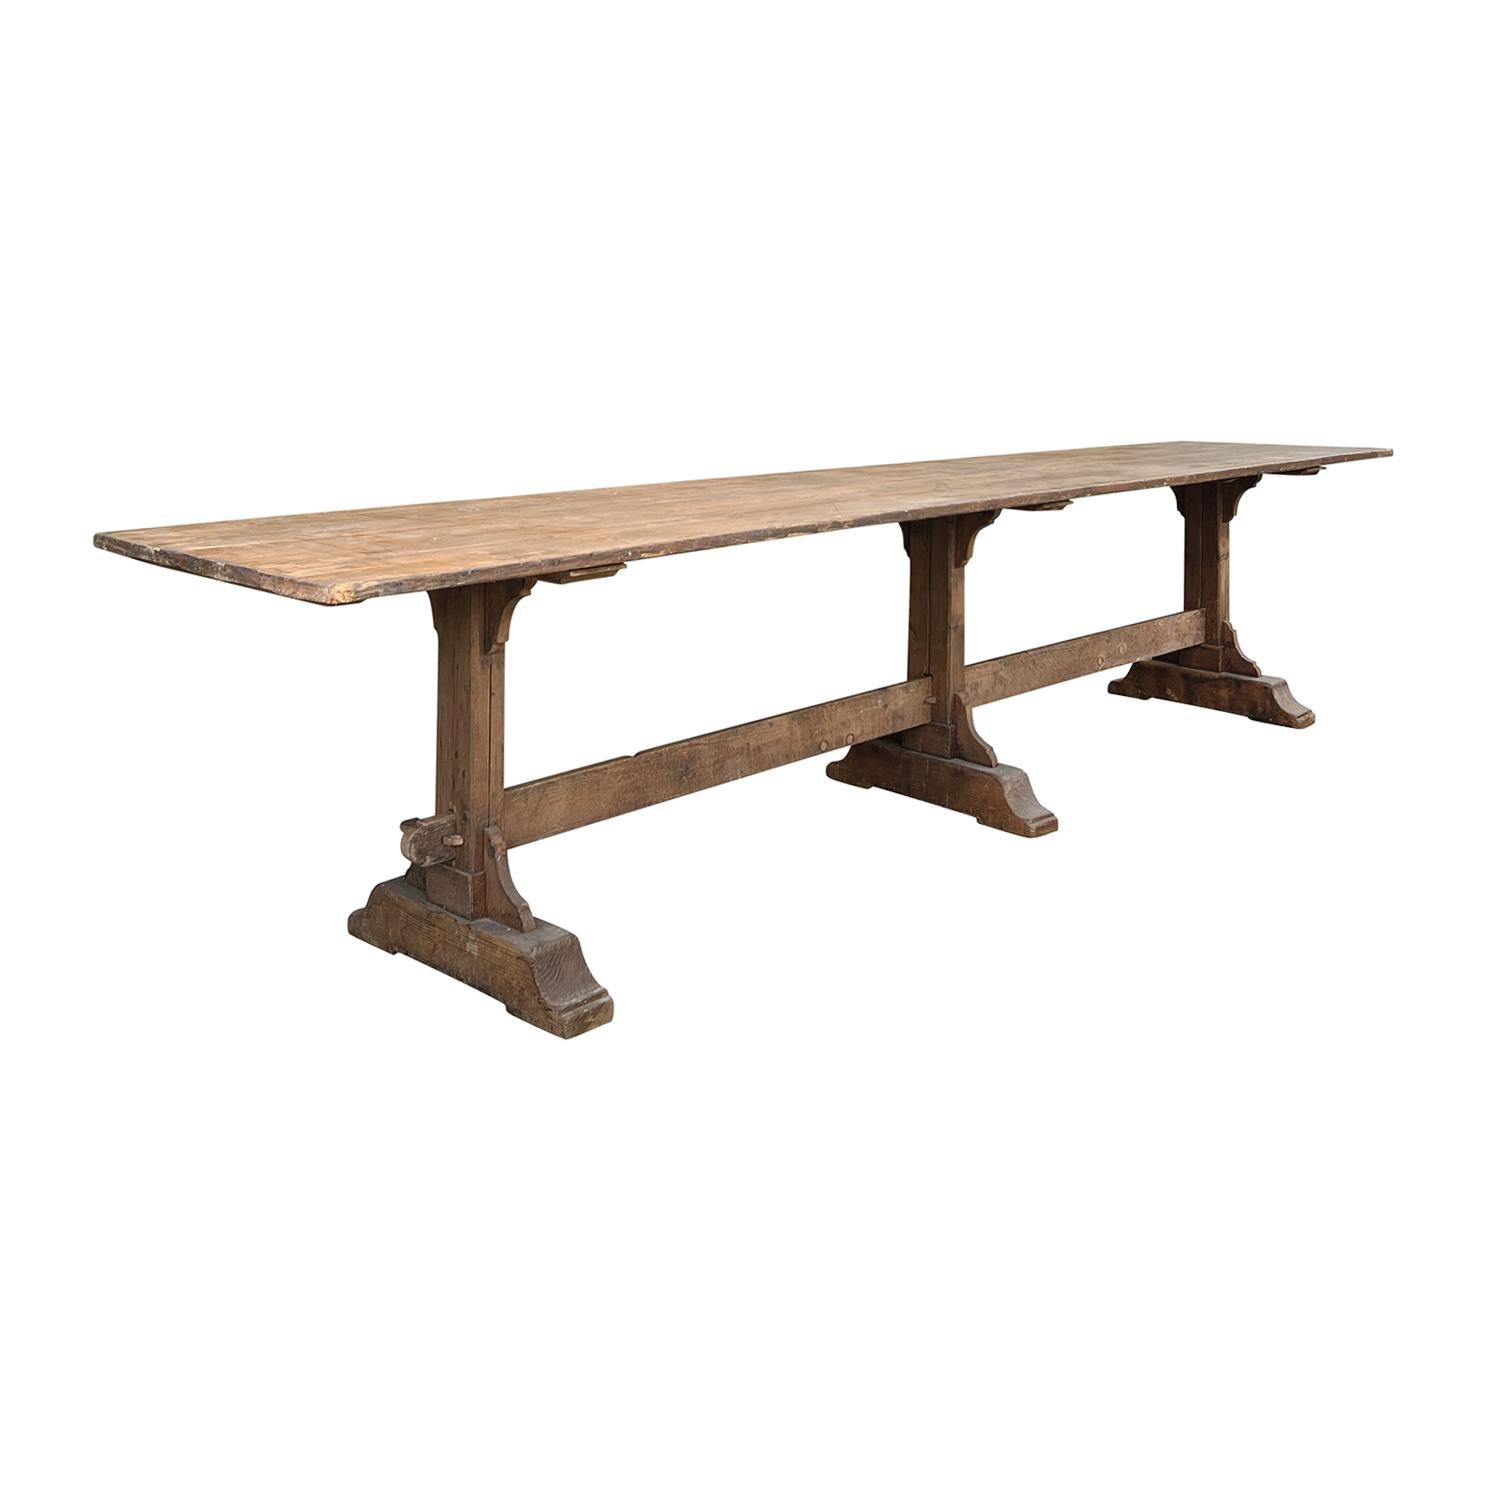 This antique oversized French solid Pinewood trestle base table is perfect for your casual dining experience, in good condition. The hand-crafted 11’ 11” long wooden table has a 1” thick top which is the perfect scale over the three sloping table